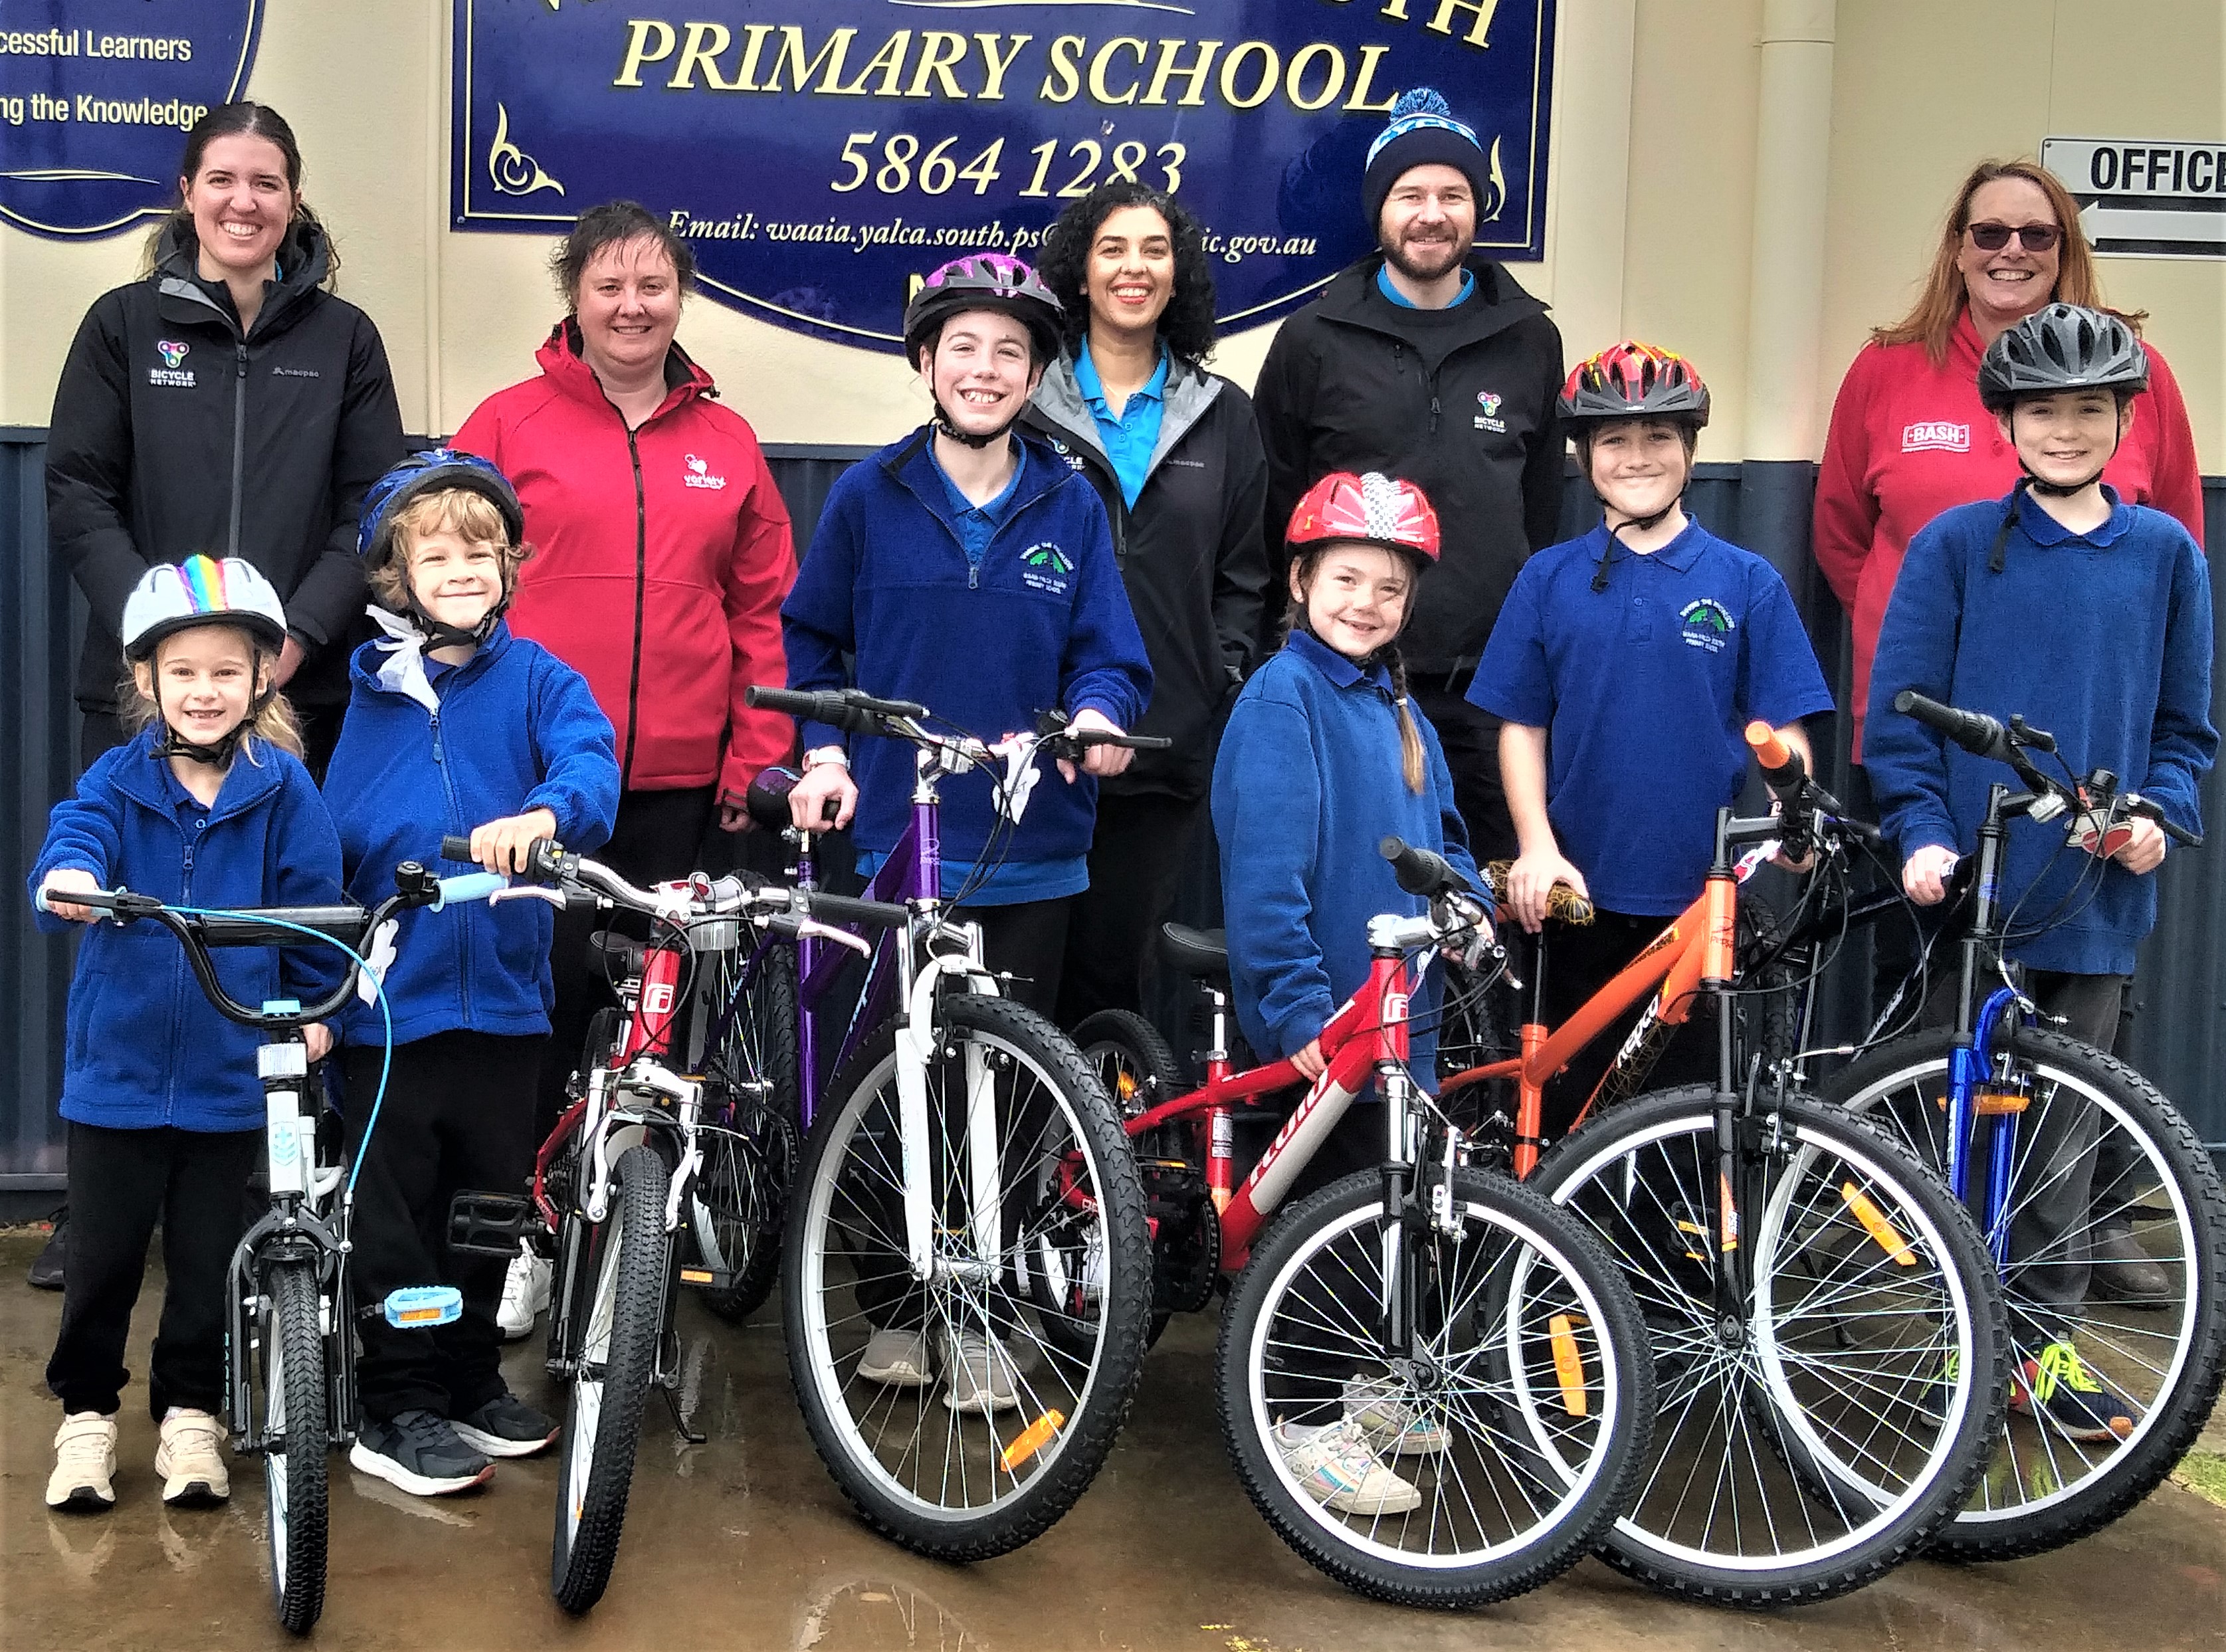 All students at this school received bikes!